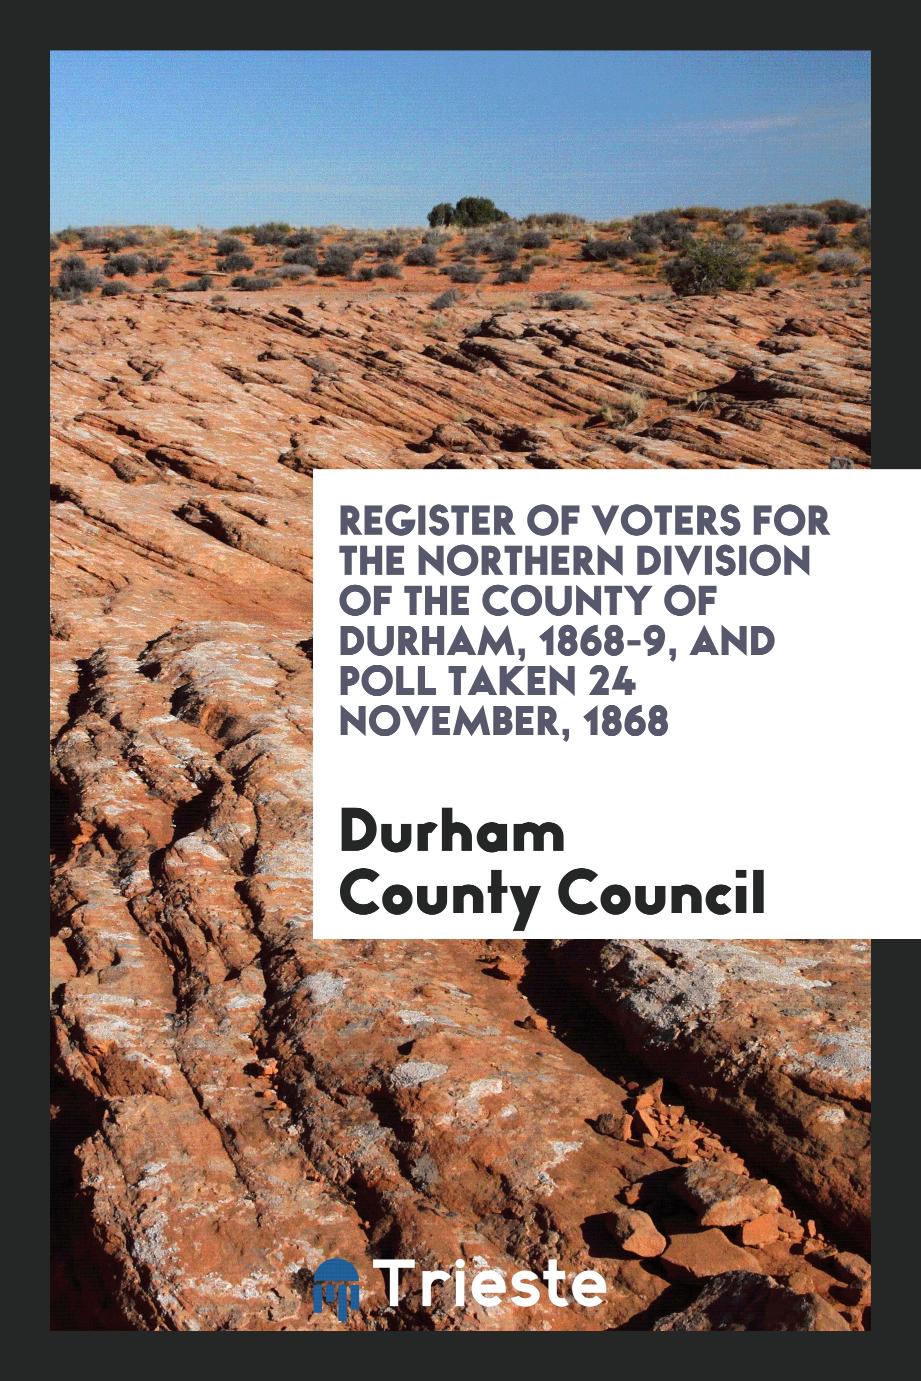 Register of Voters for the Northern Division of the County of Durham, 1868-9, and Poll Taken 24 November, 1868